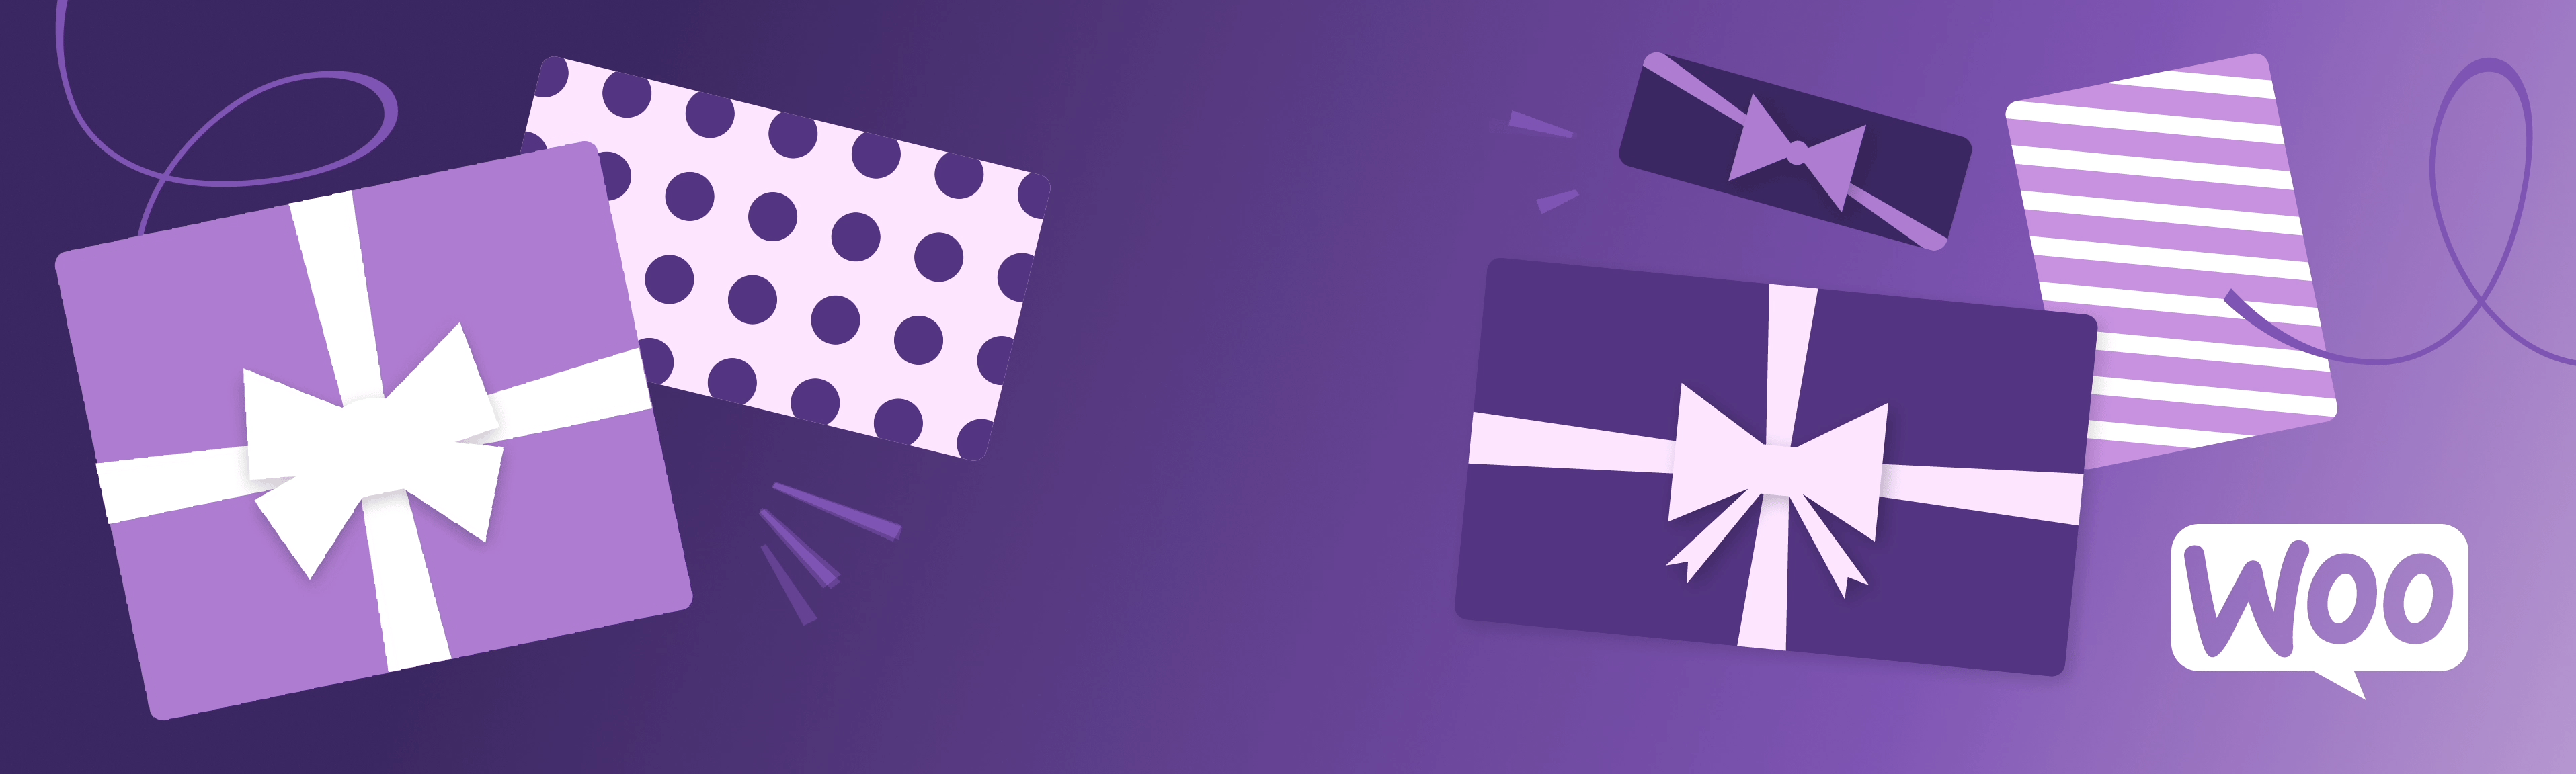 moving GIF with purple gift boxes and the WooCommerce logo